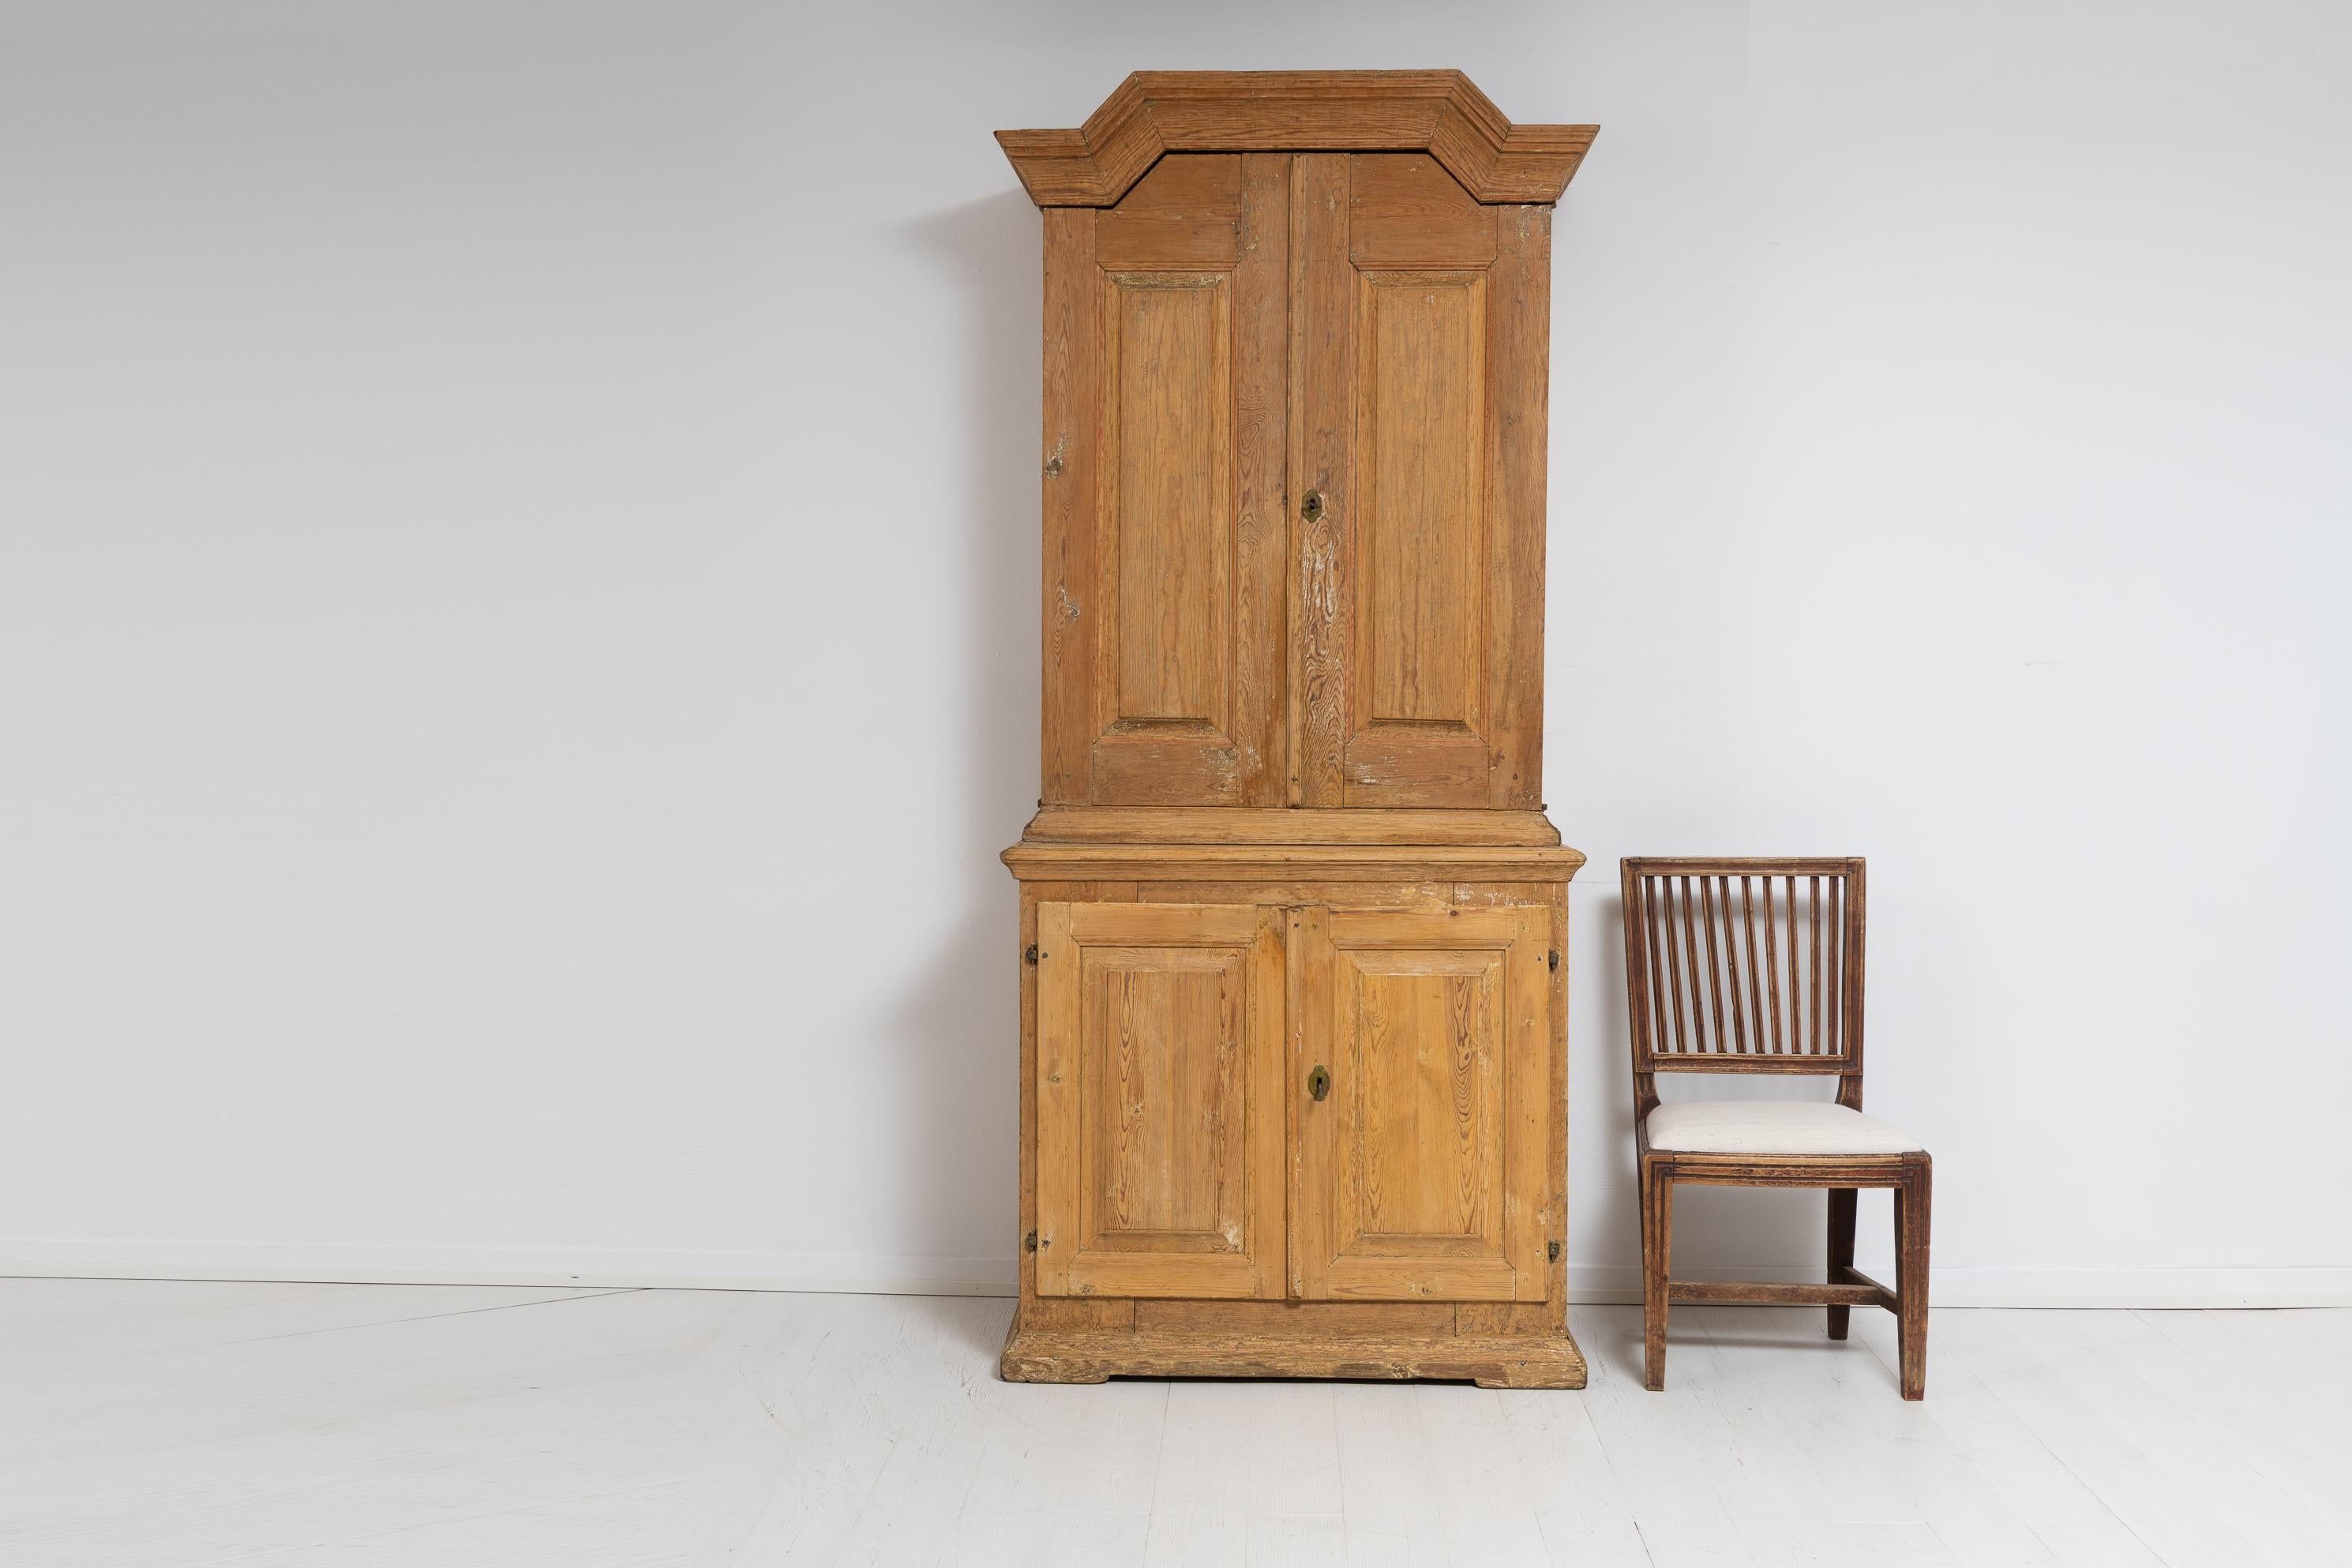 Late 1700s Swedish country house cabinet in baroque style. The cabinet is in two parts and hand-made in Sweden. On the outside the aged wood is visible with the grain and structure of the wood clearly seen. The cabinet is well-made with a solid